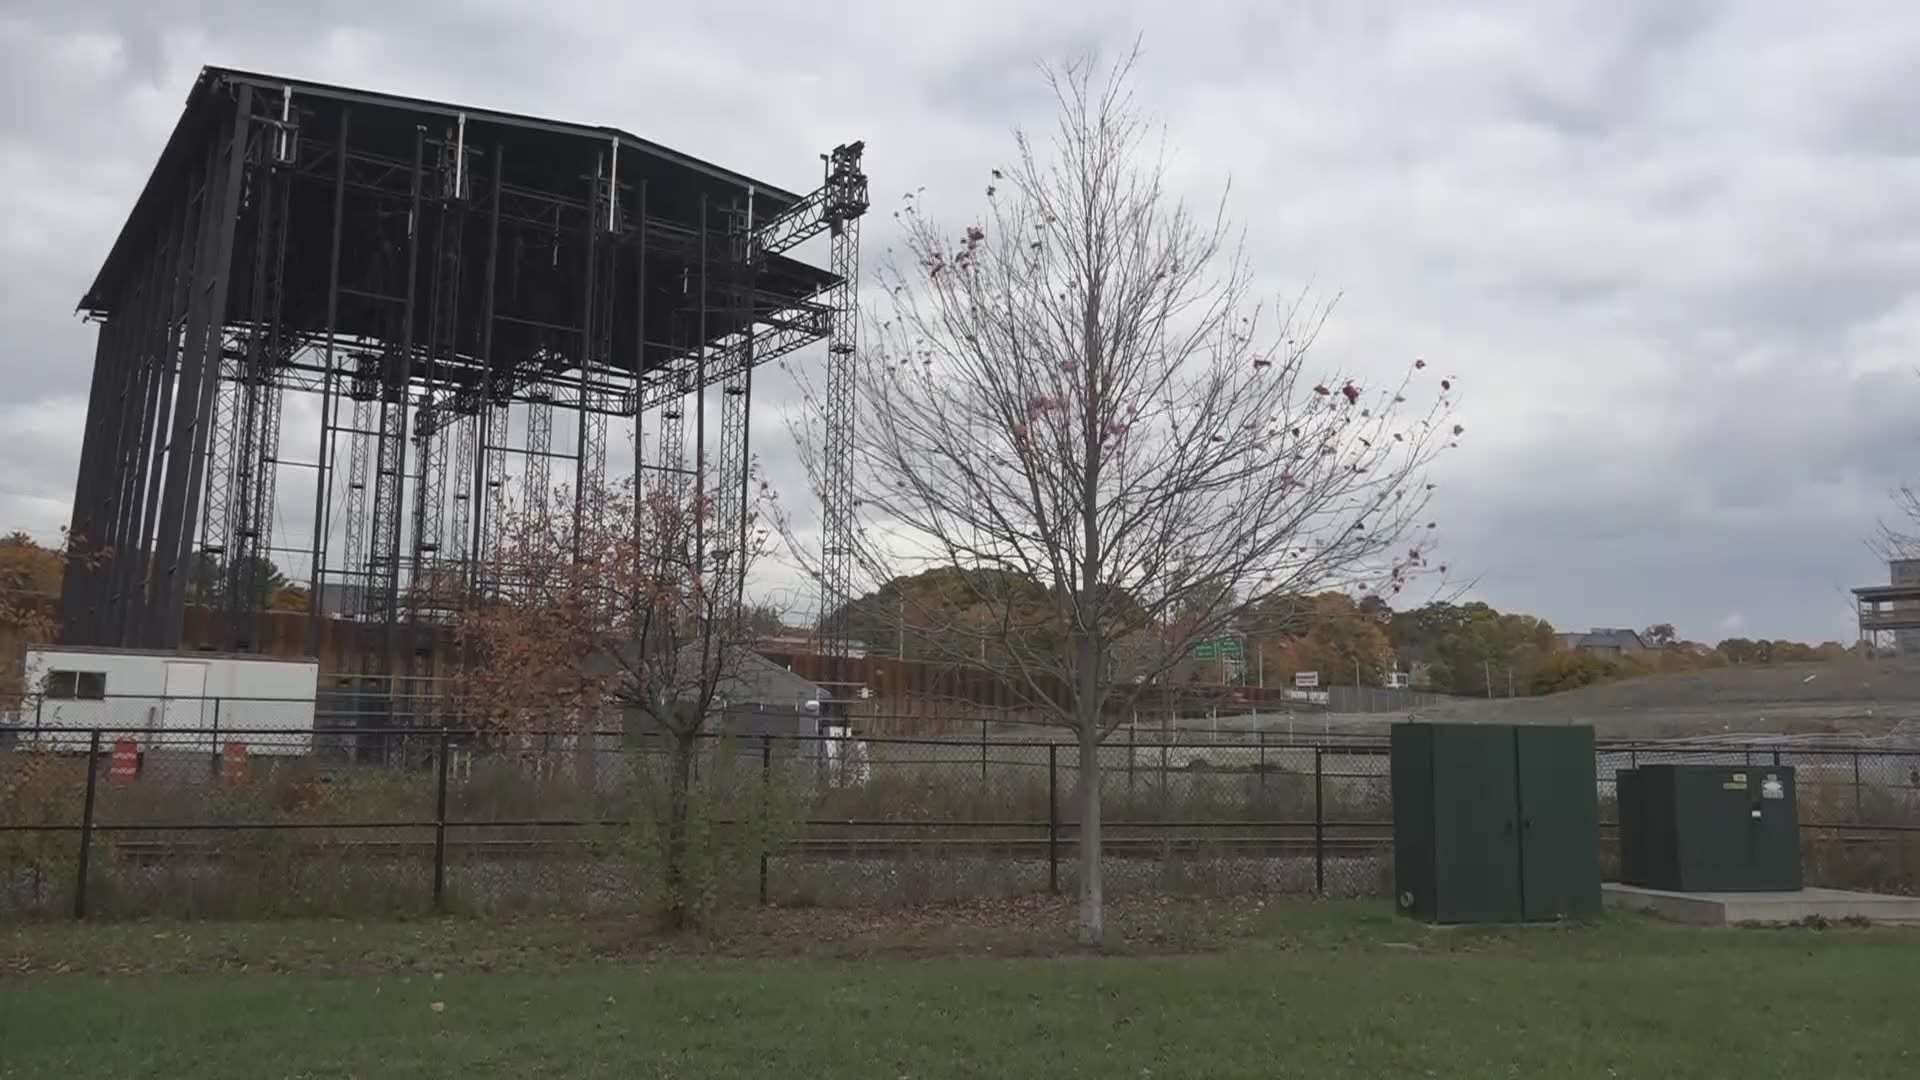 A post via Darling's Waterfront Pavilion's Facebook page Monday indicates the venue is undergoing renovations to improve experiences for concerts and events.